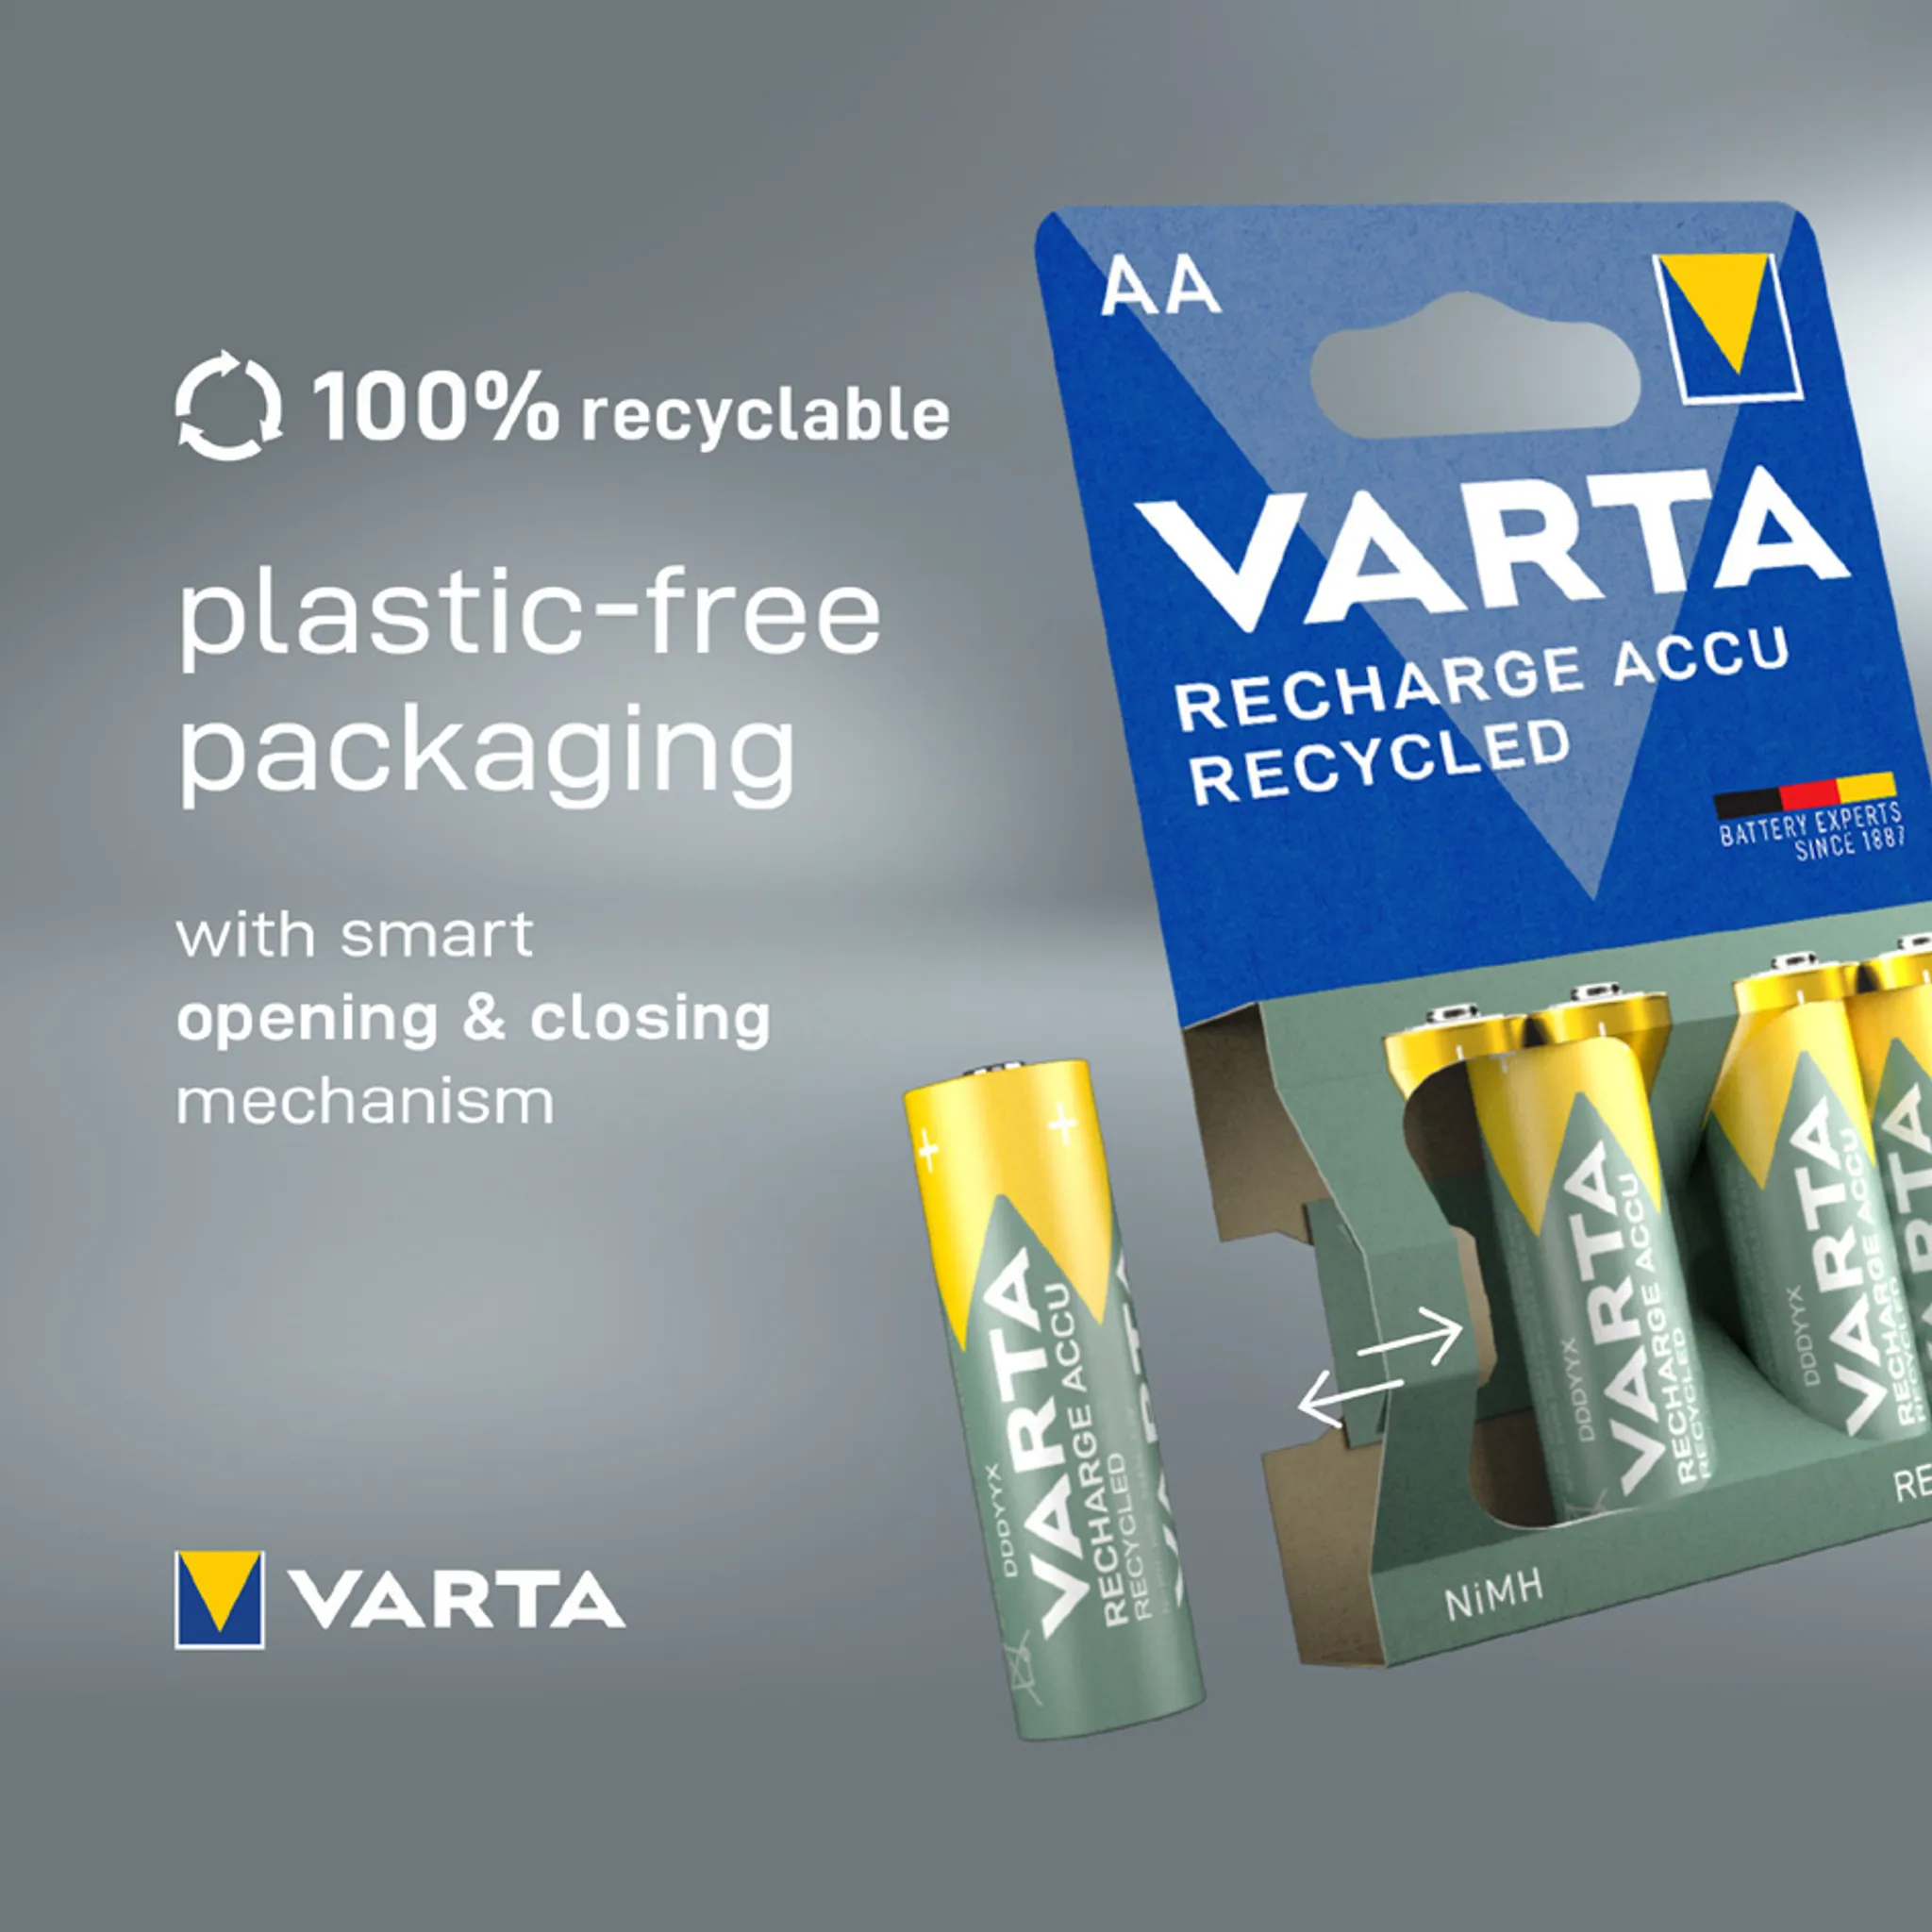 Varta Recharge - Recycled 56816 Accu Batterie